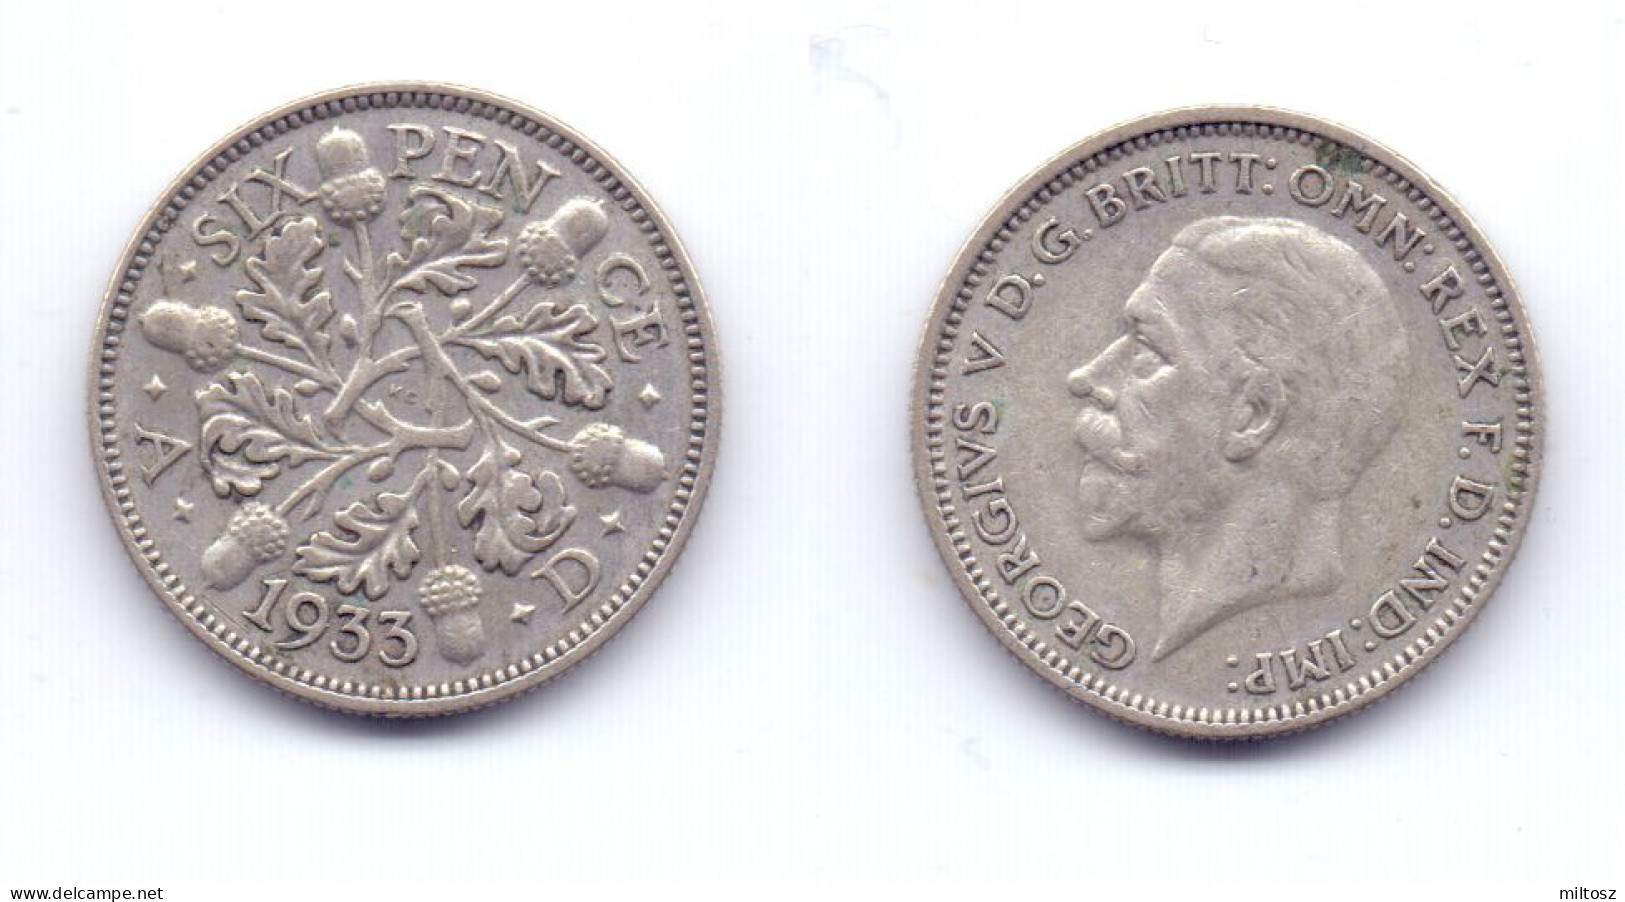 Great Britain 6 Pence 1933 - H. 6 Pence